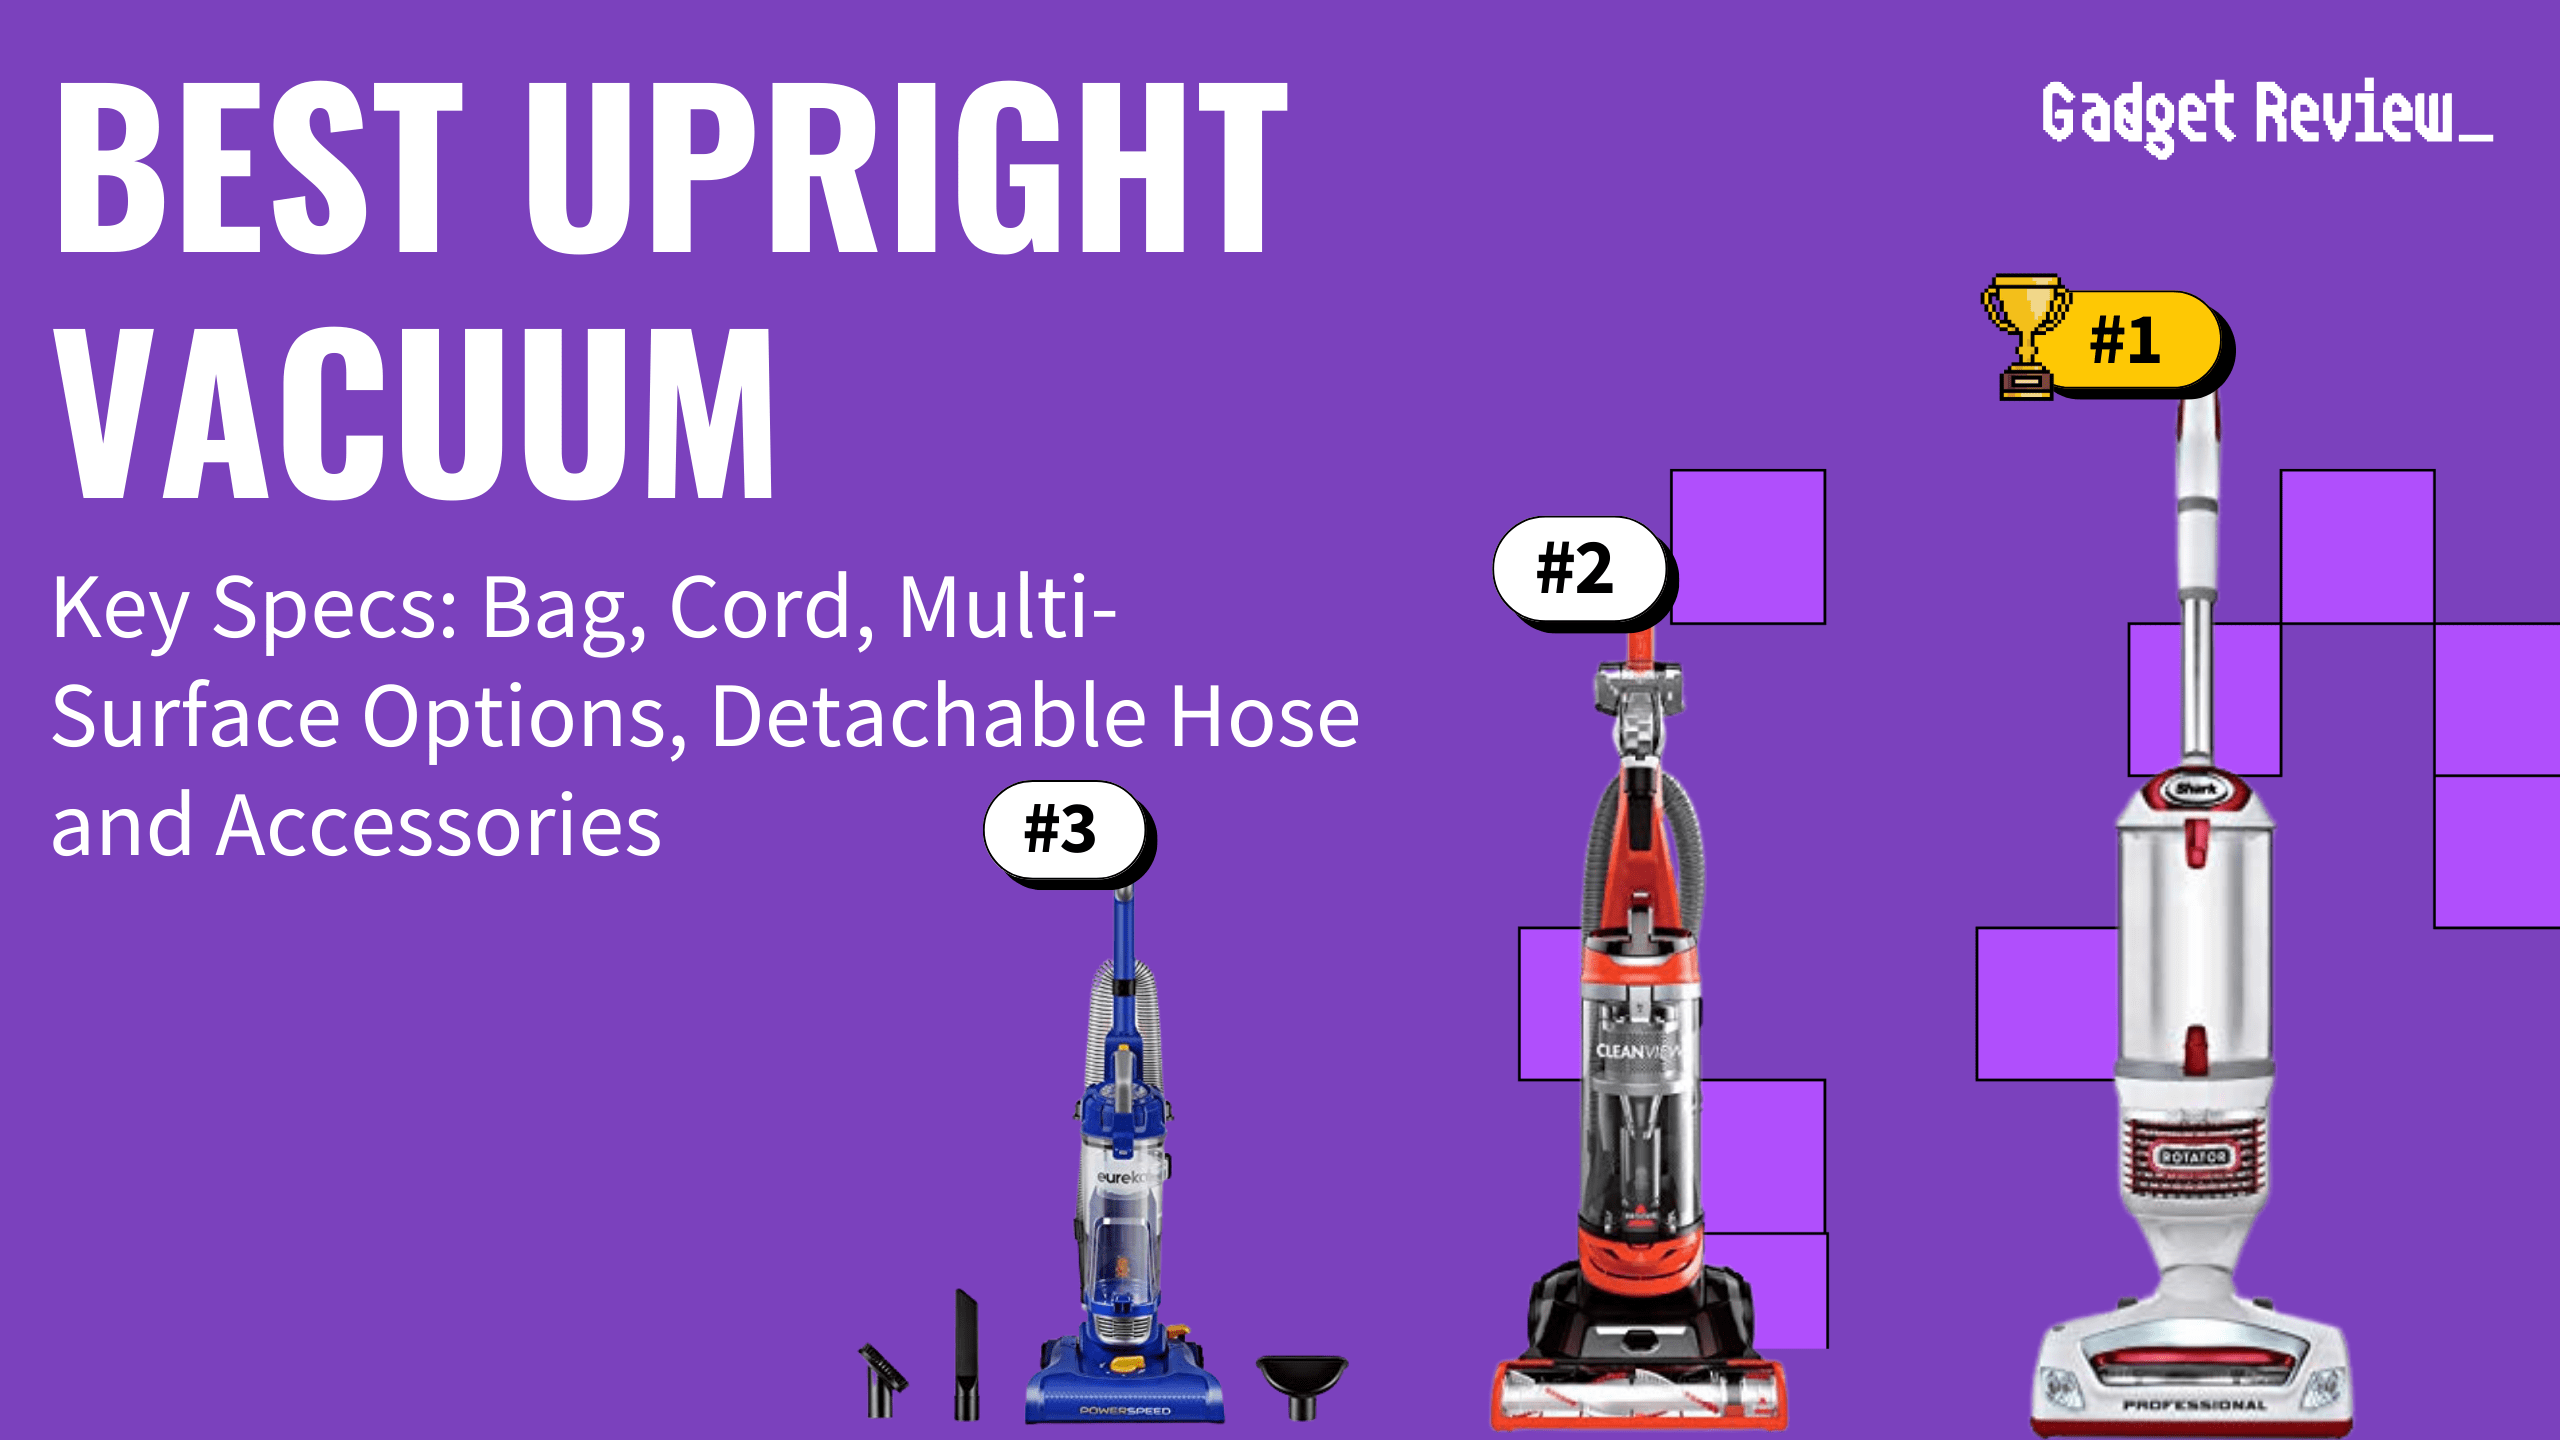 best upright vacuum featured image that shows the top three best vacuum cleaner models